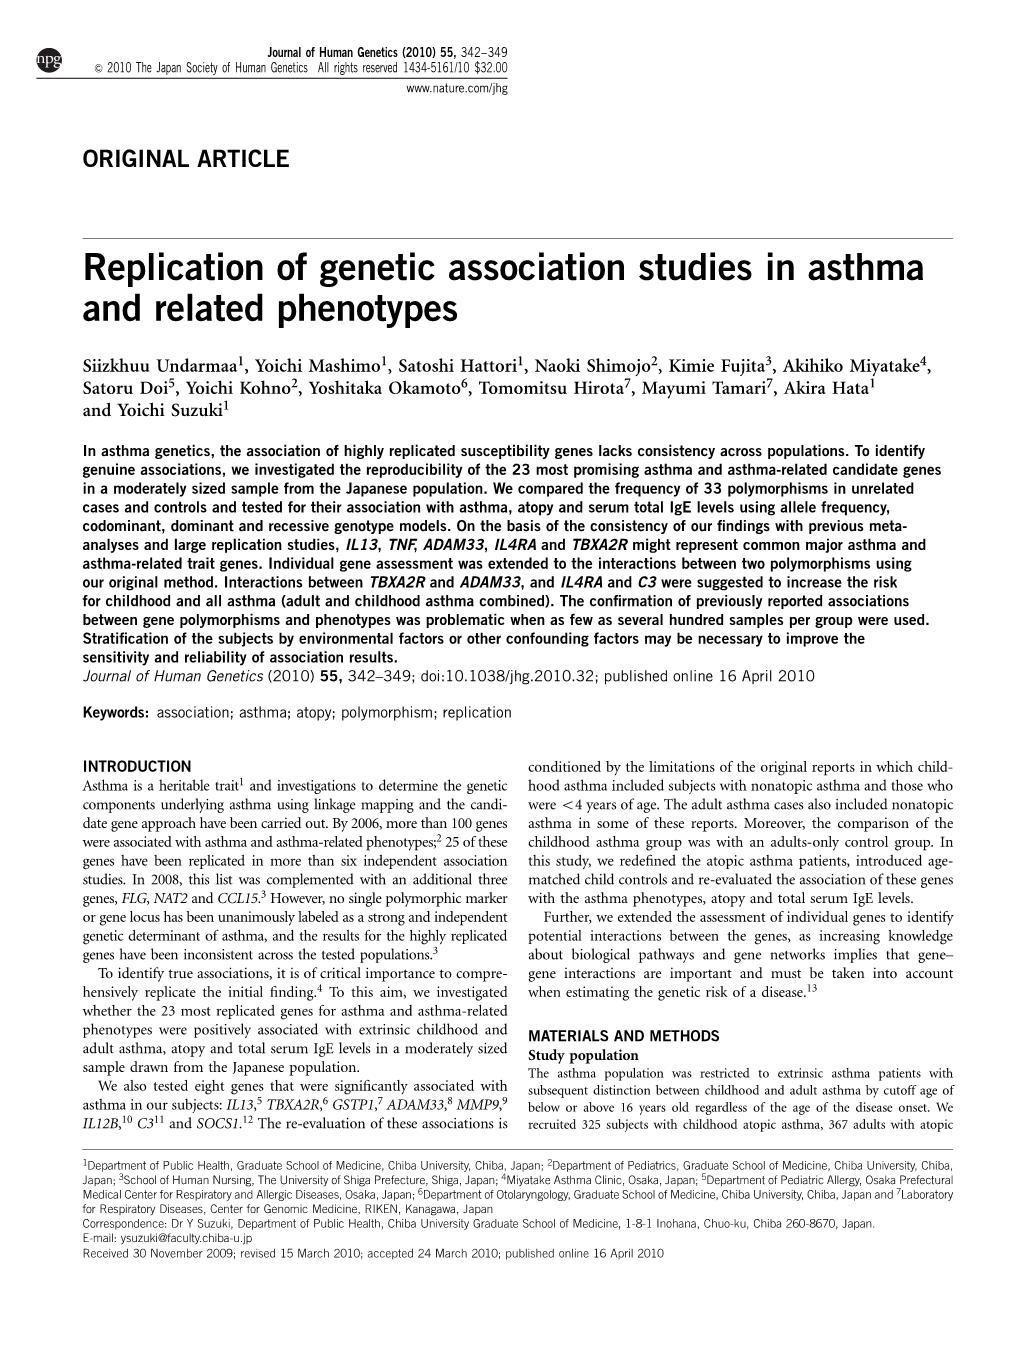 Replication of Genetic Association Studies in Asthma and Related Phenotypes